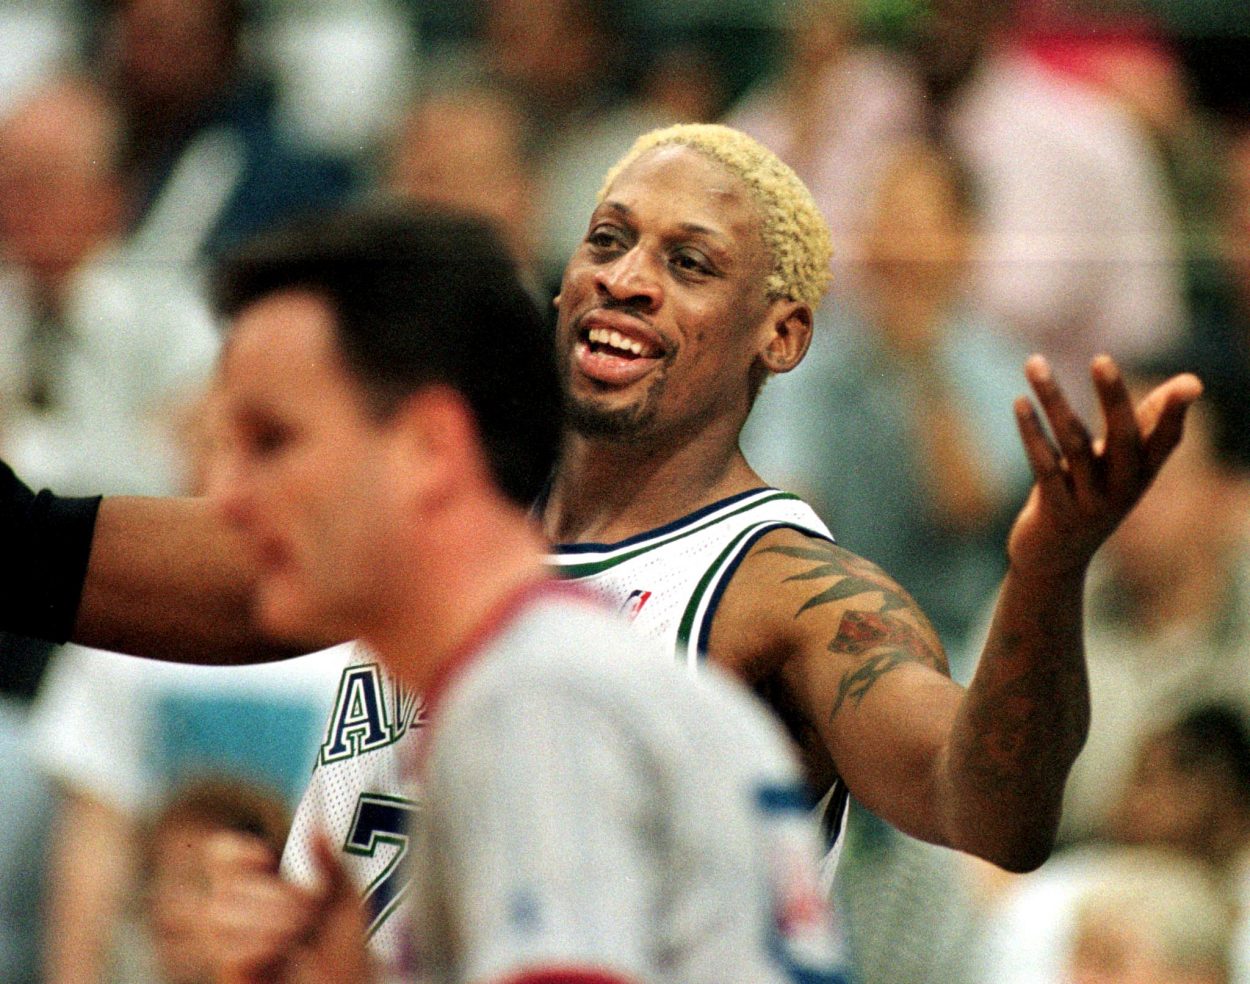 Dennis Rodman Humiliated Dirk Nowitzki and the Entire Mavericks Organization During His Ill-Fated Run in Dallas: ‘Other Than That, They’re Ready to Go’